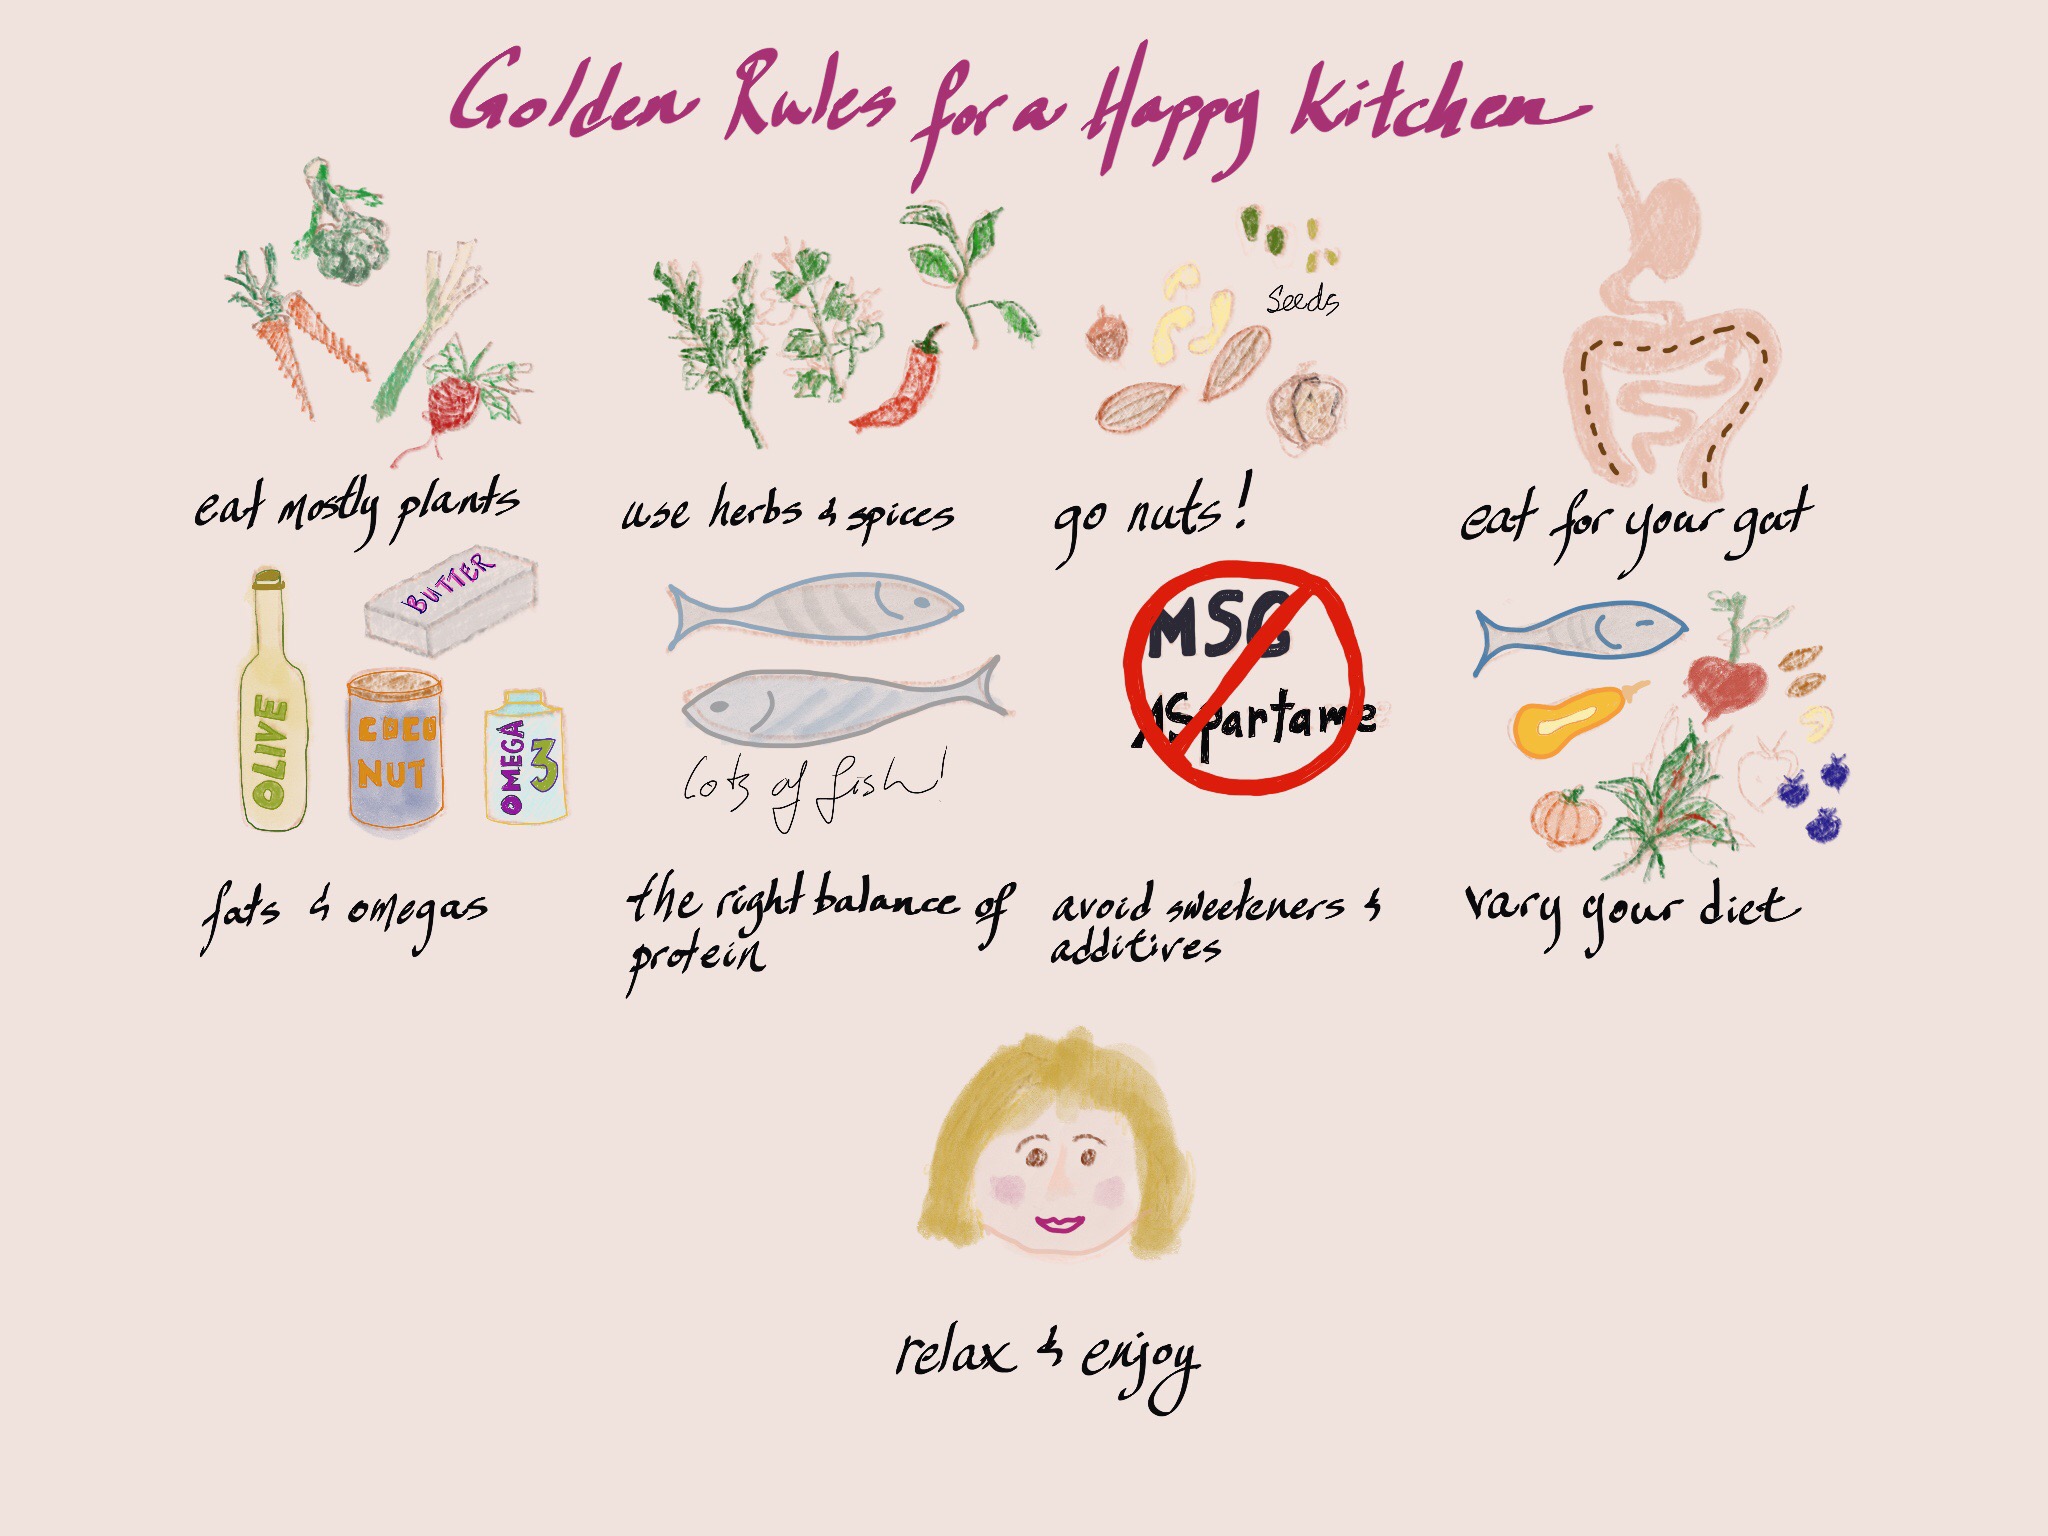 Artwork for Golden Rules for a Happy Kitchen, by Christine Chang Hanway